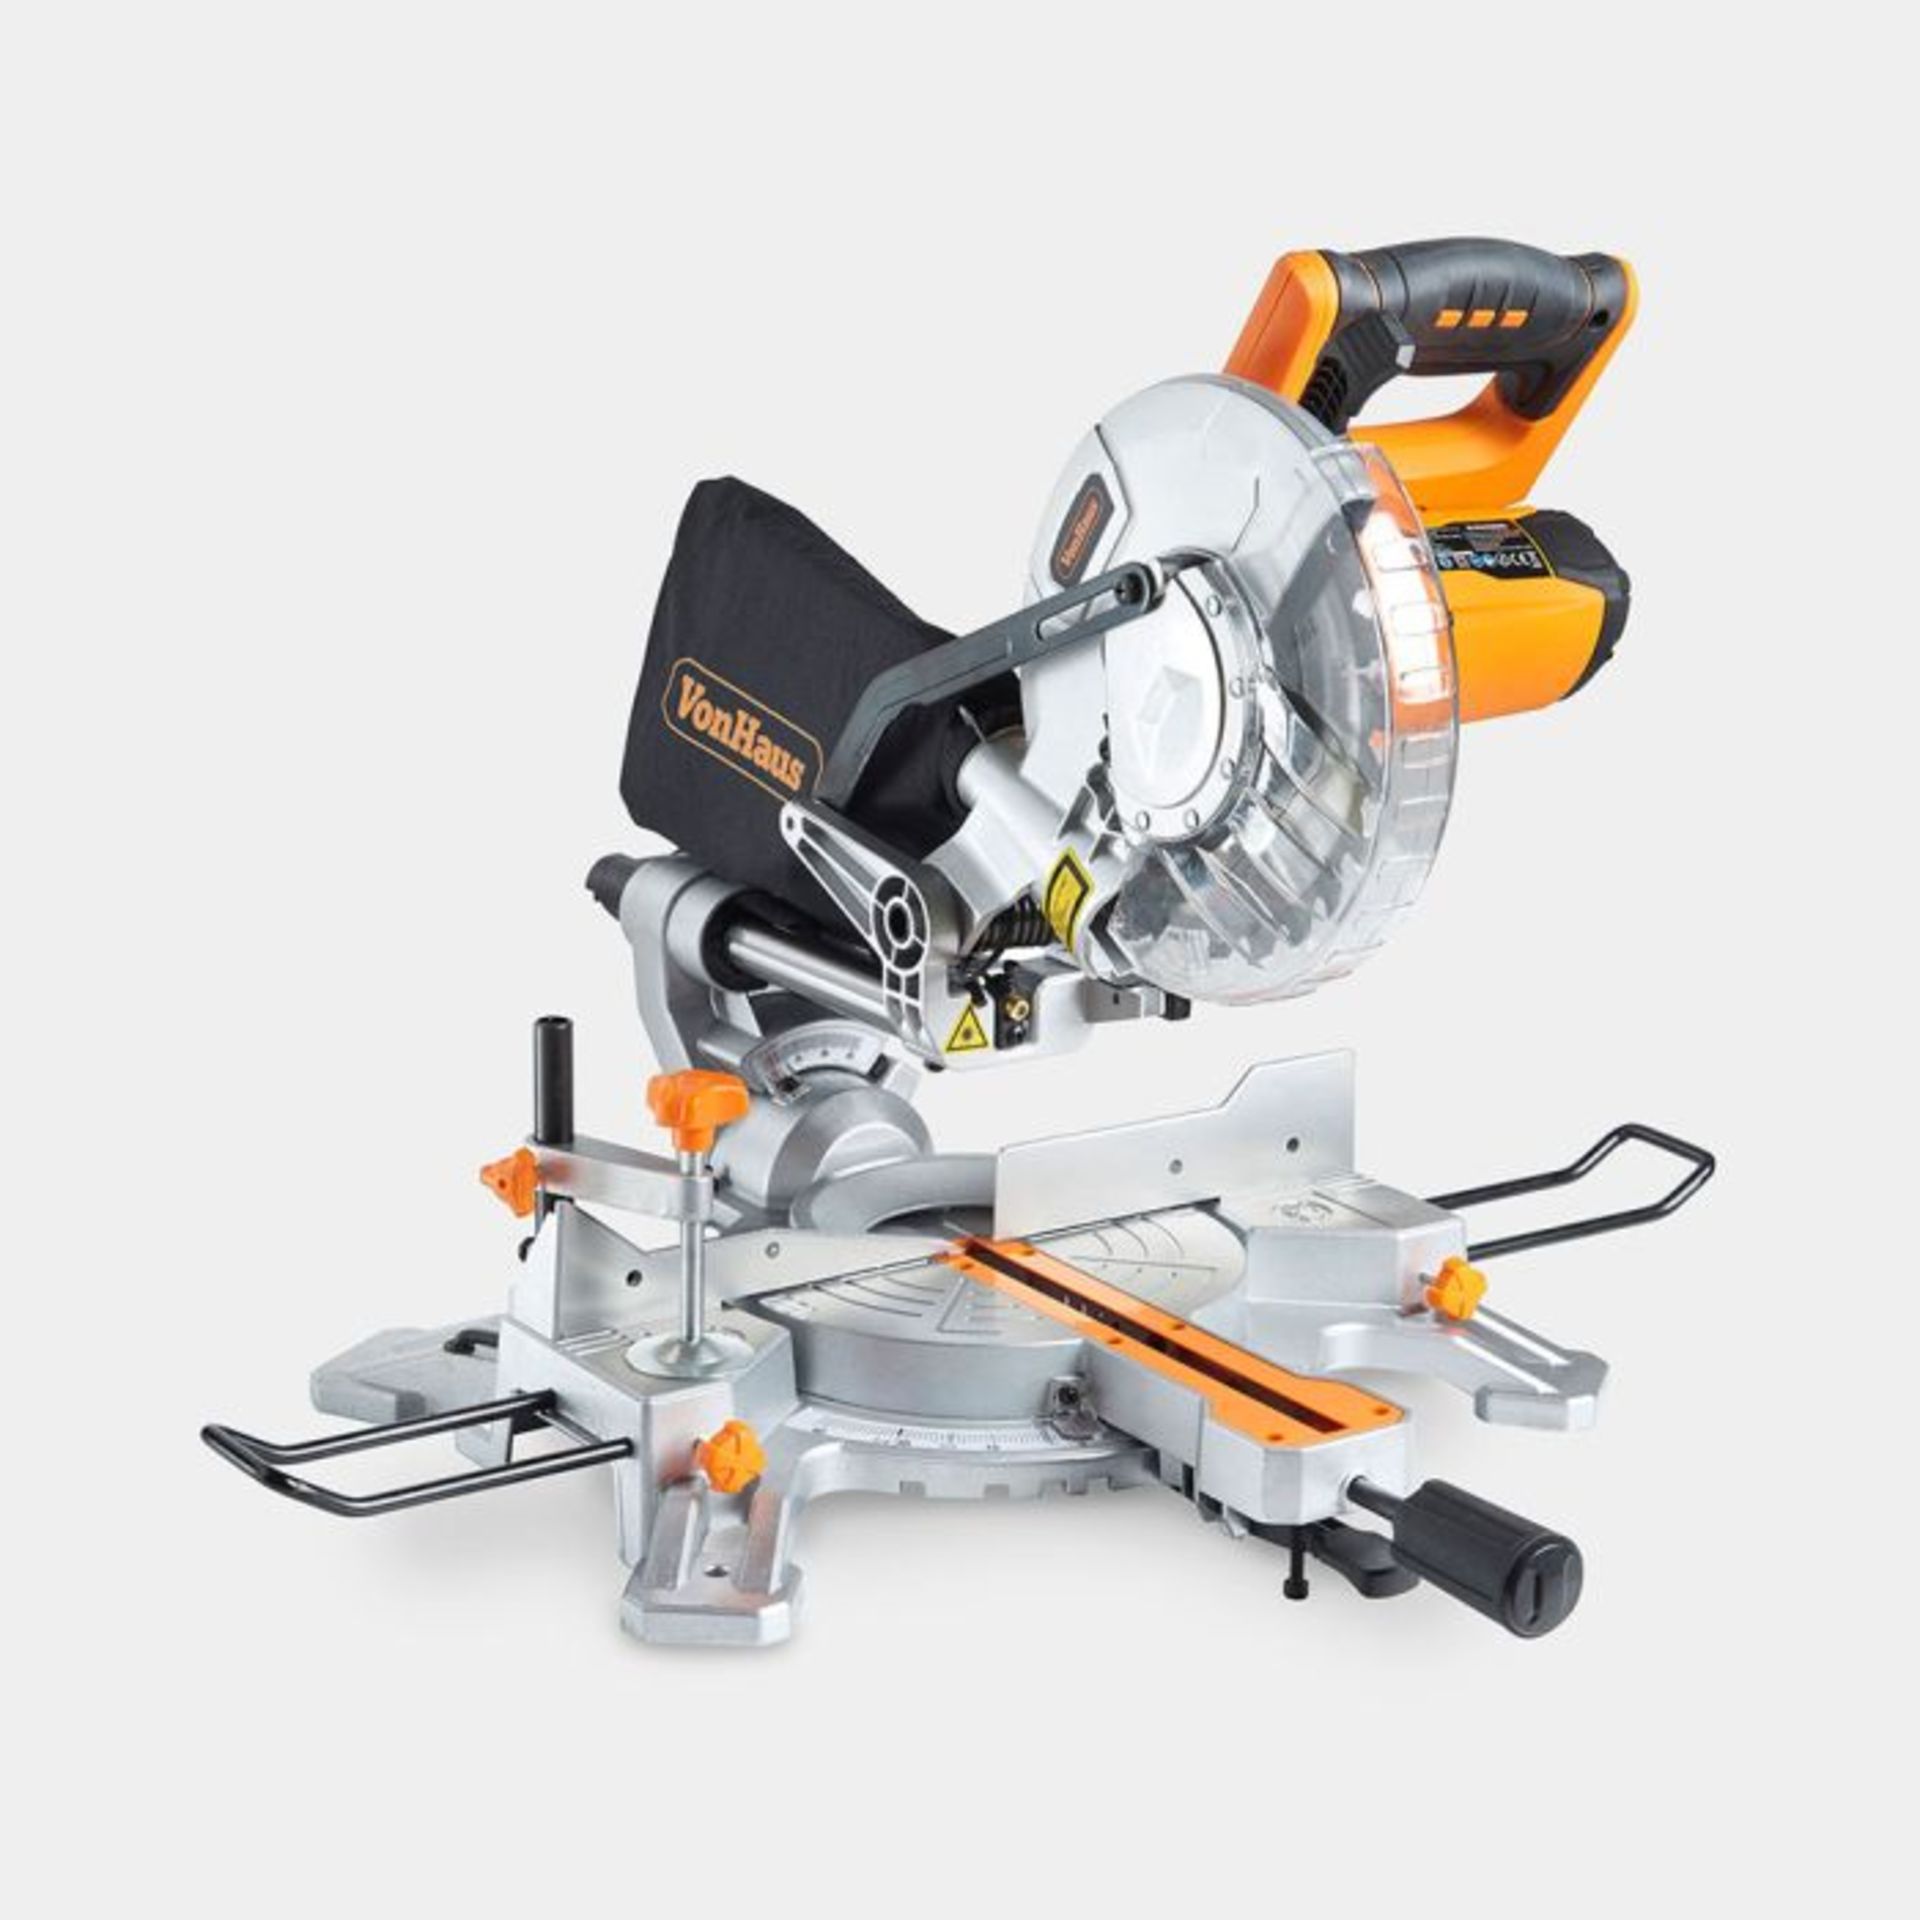 1500W Sliding Mitre Saw. - ER52. Powerful, reliable and highly versatile the 1500W sliding mitre saw